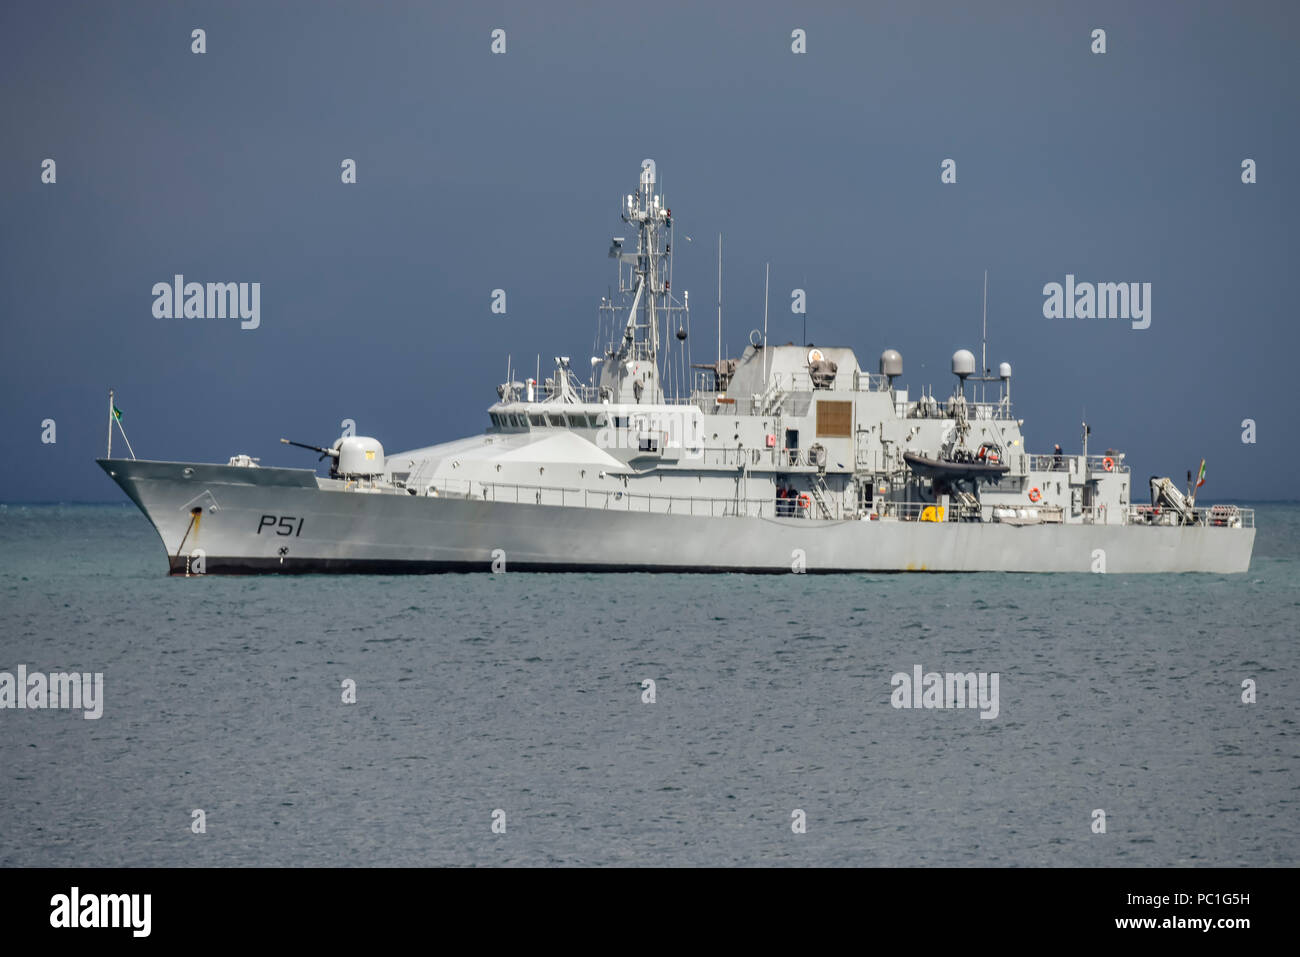 LÉ Róisín (P51) offshore patrol ship for the Irish Naval Service, involved with fisheries protection, search and rescue and maritime protection operations. Stock Photo